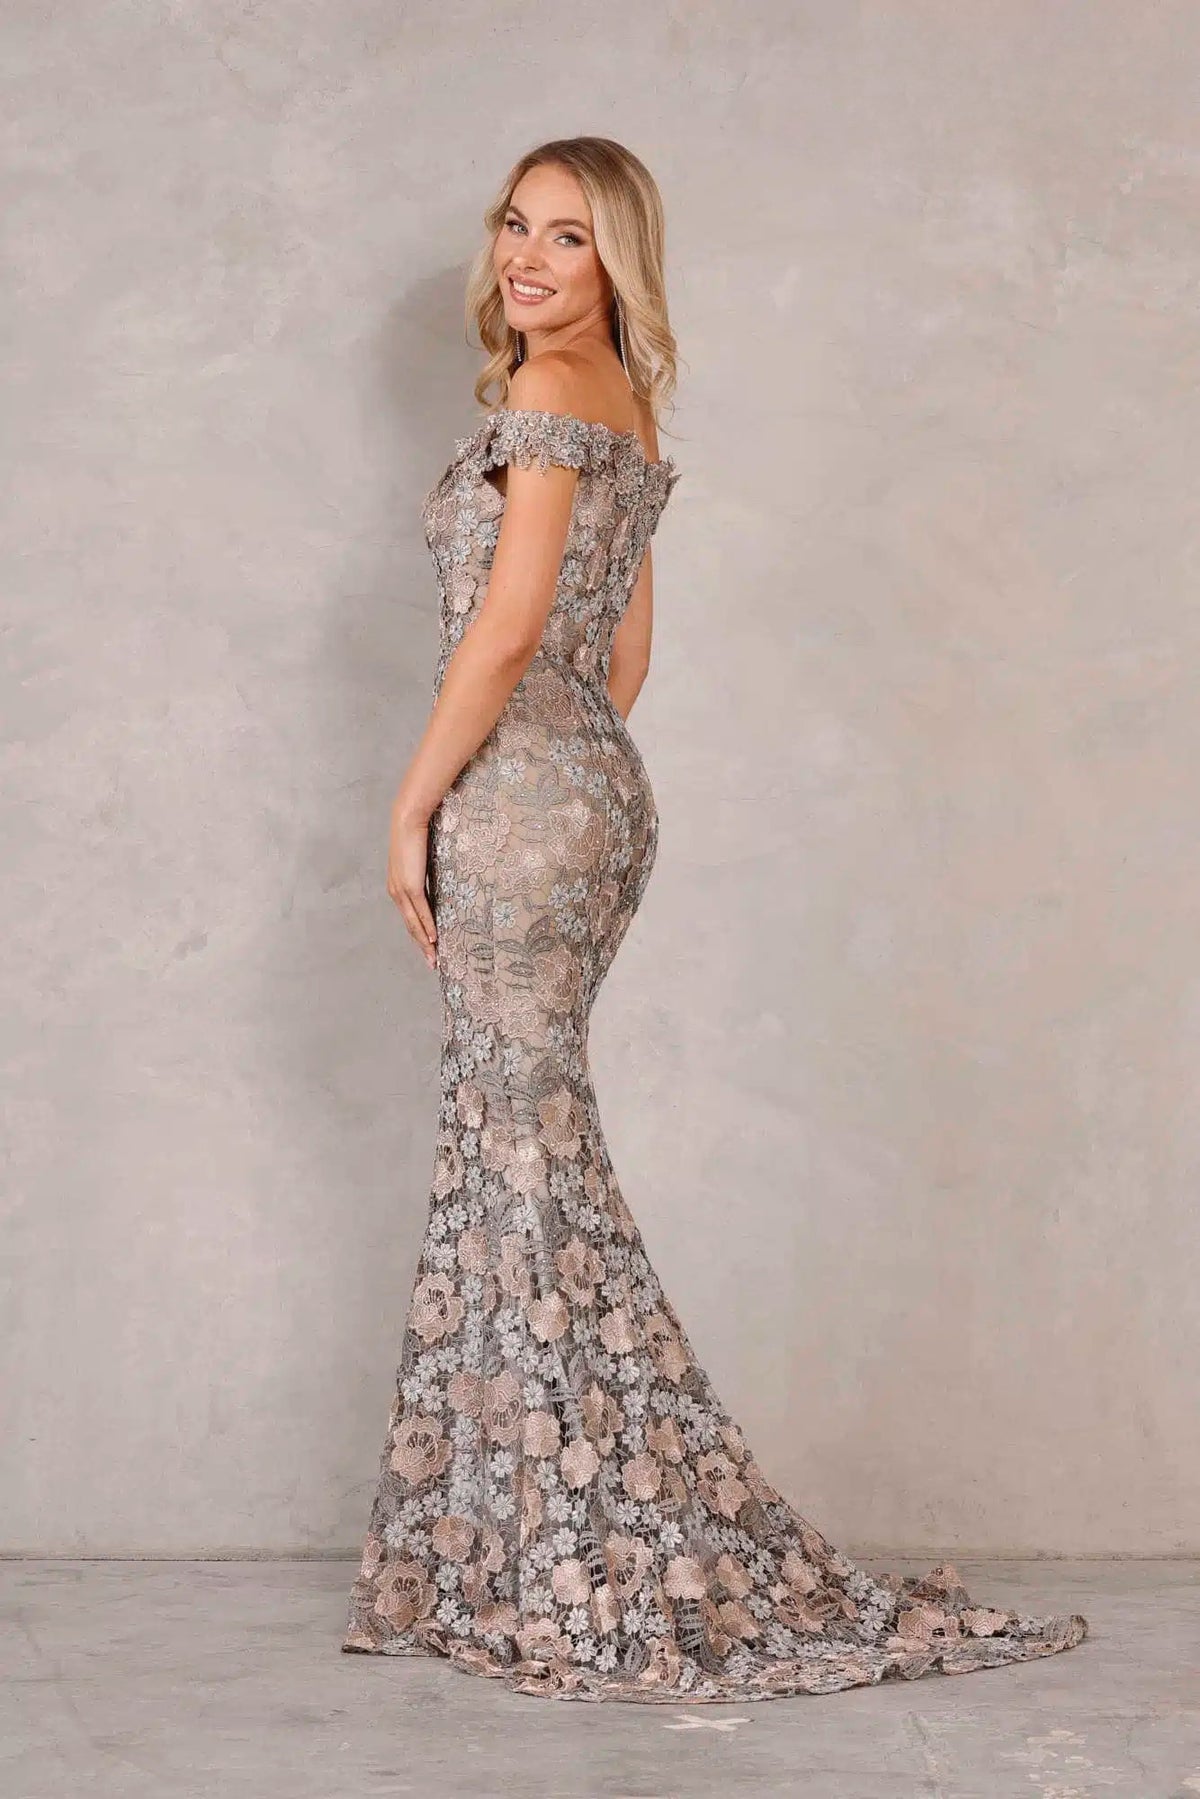 Shop the stunning Terani Couture 2111M5271 long dress at Madeline's Boutique. This pewter bronze lace gown features an off-shoulder design, sweetheart neckline, and a beautiful train. Perfect for evening occasions and as a Mother of the Bride or Groom dress. Visit our Toronto and Boca Raton locations for the latest fashion trends